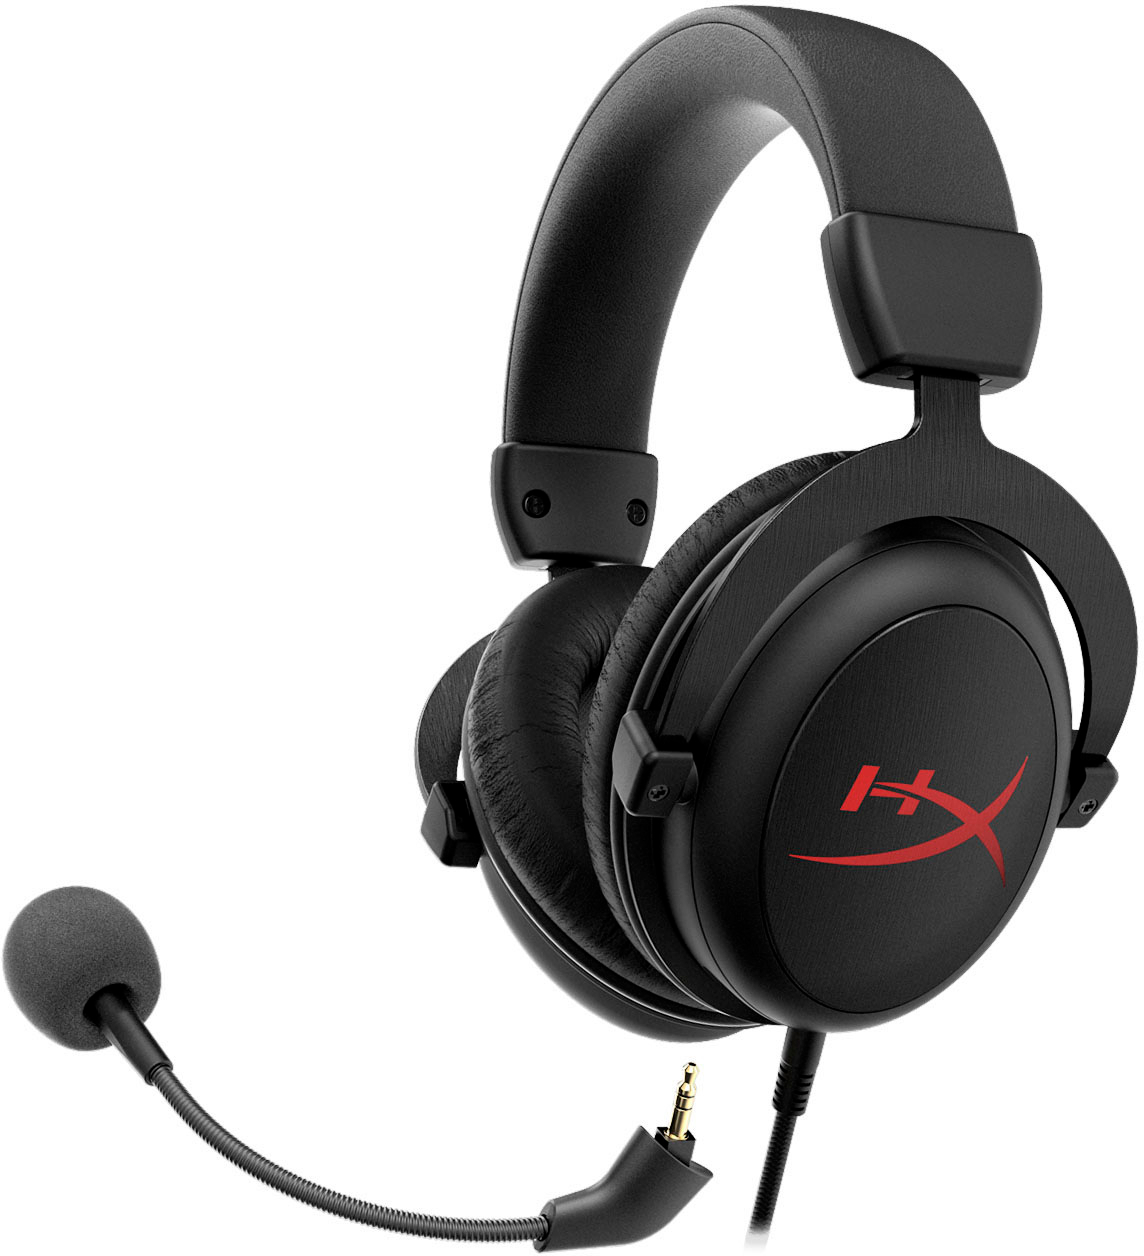 HyperX Streamer Pack: SoloCast USB Mic + Cloud Core Wired 7.1 Headset $50